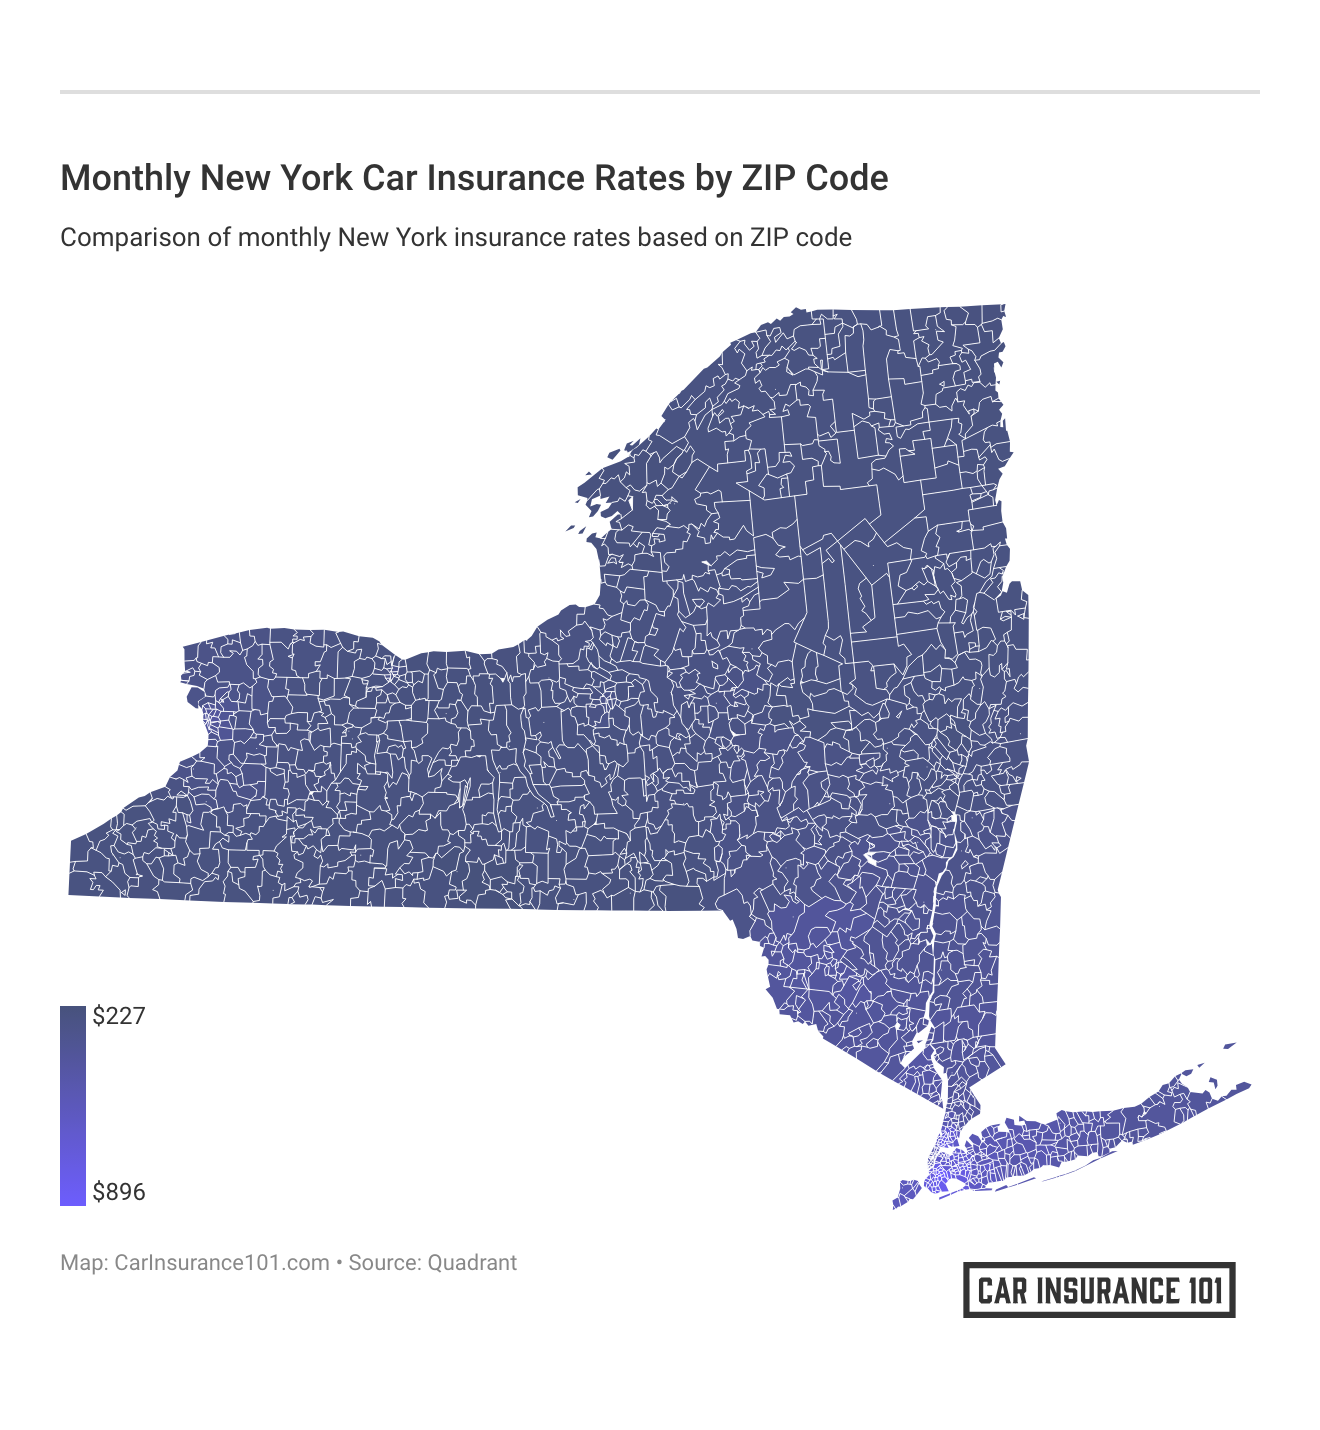 <h3>Monthly New York Car Insurance Rates by ZIP Code</h3>